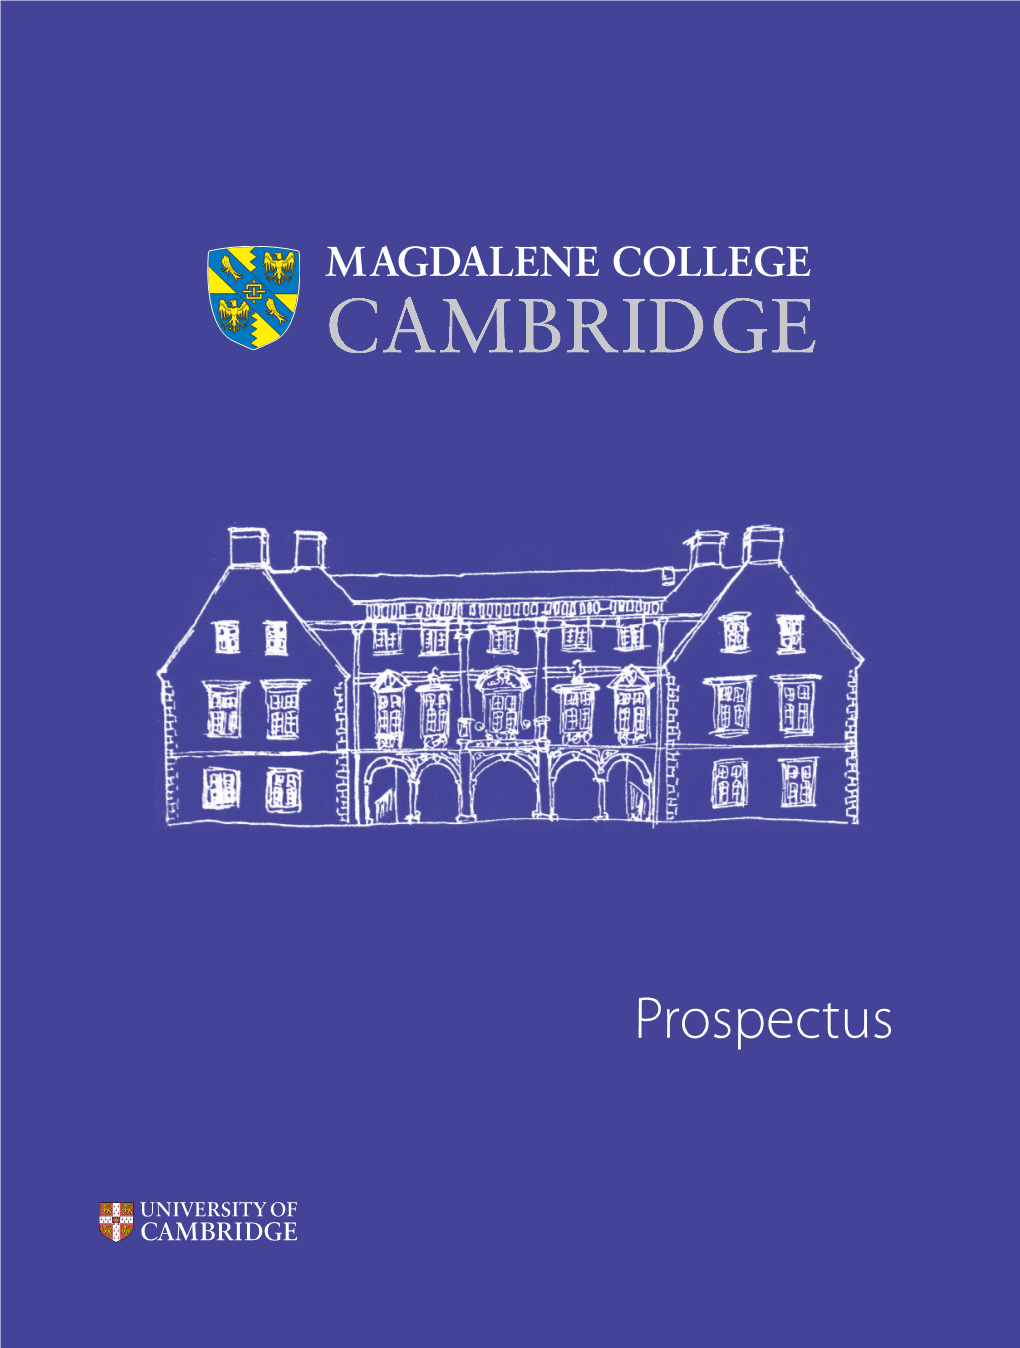 Prospectus Welcome to Magdalene